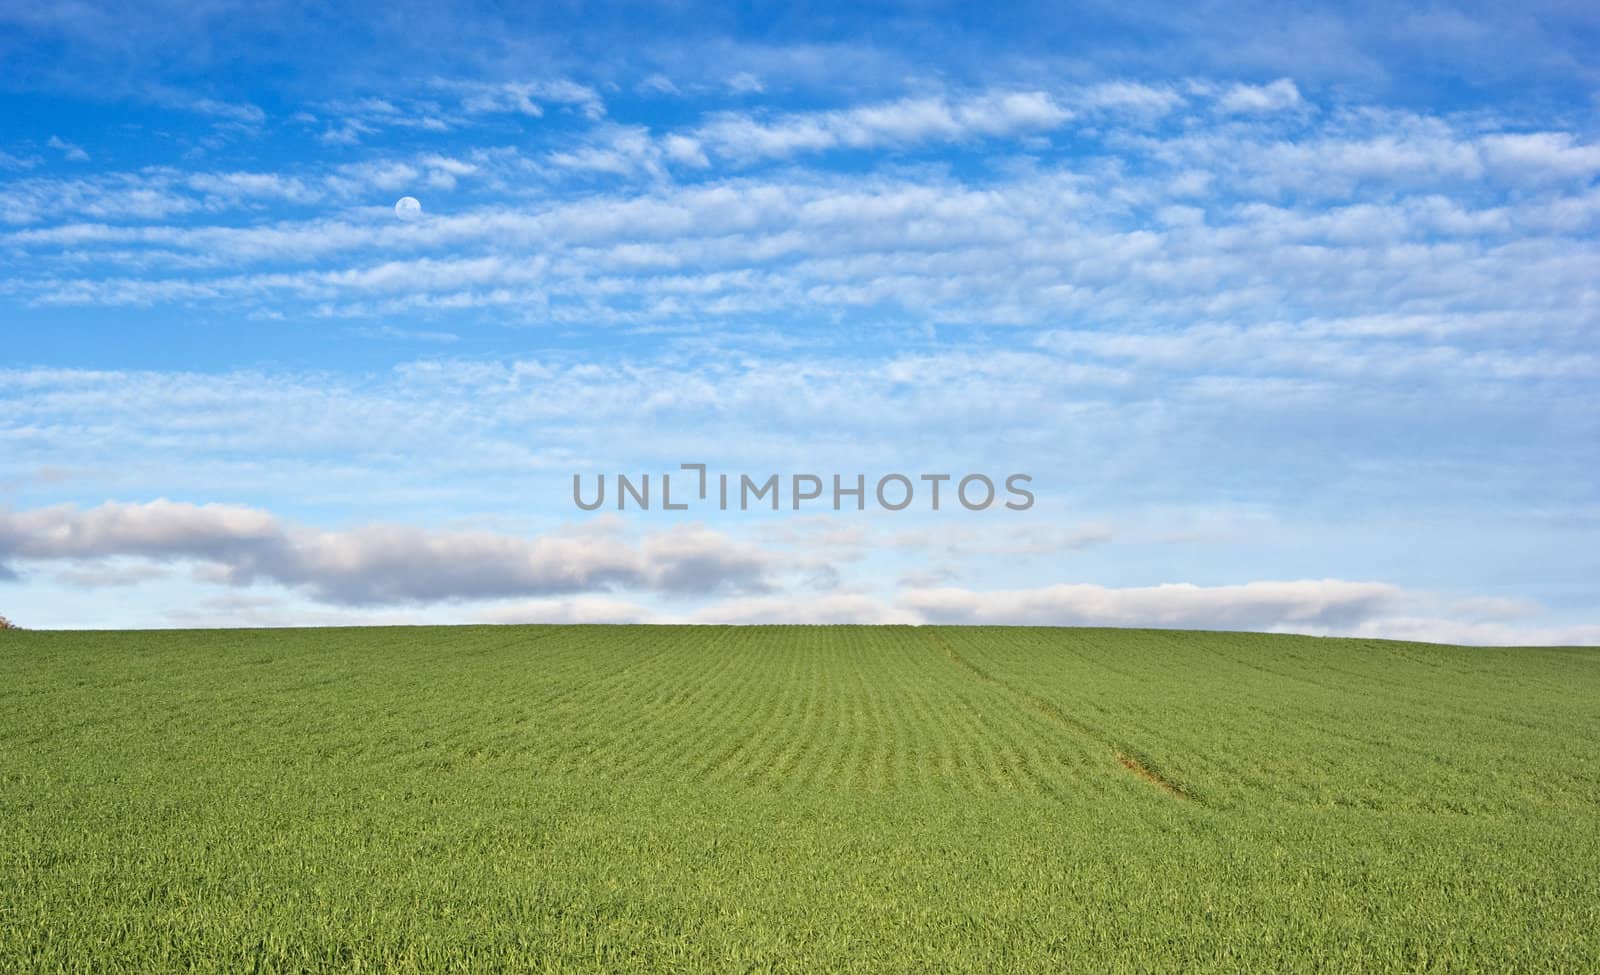 great image of a green wheat field and blue sky